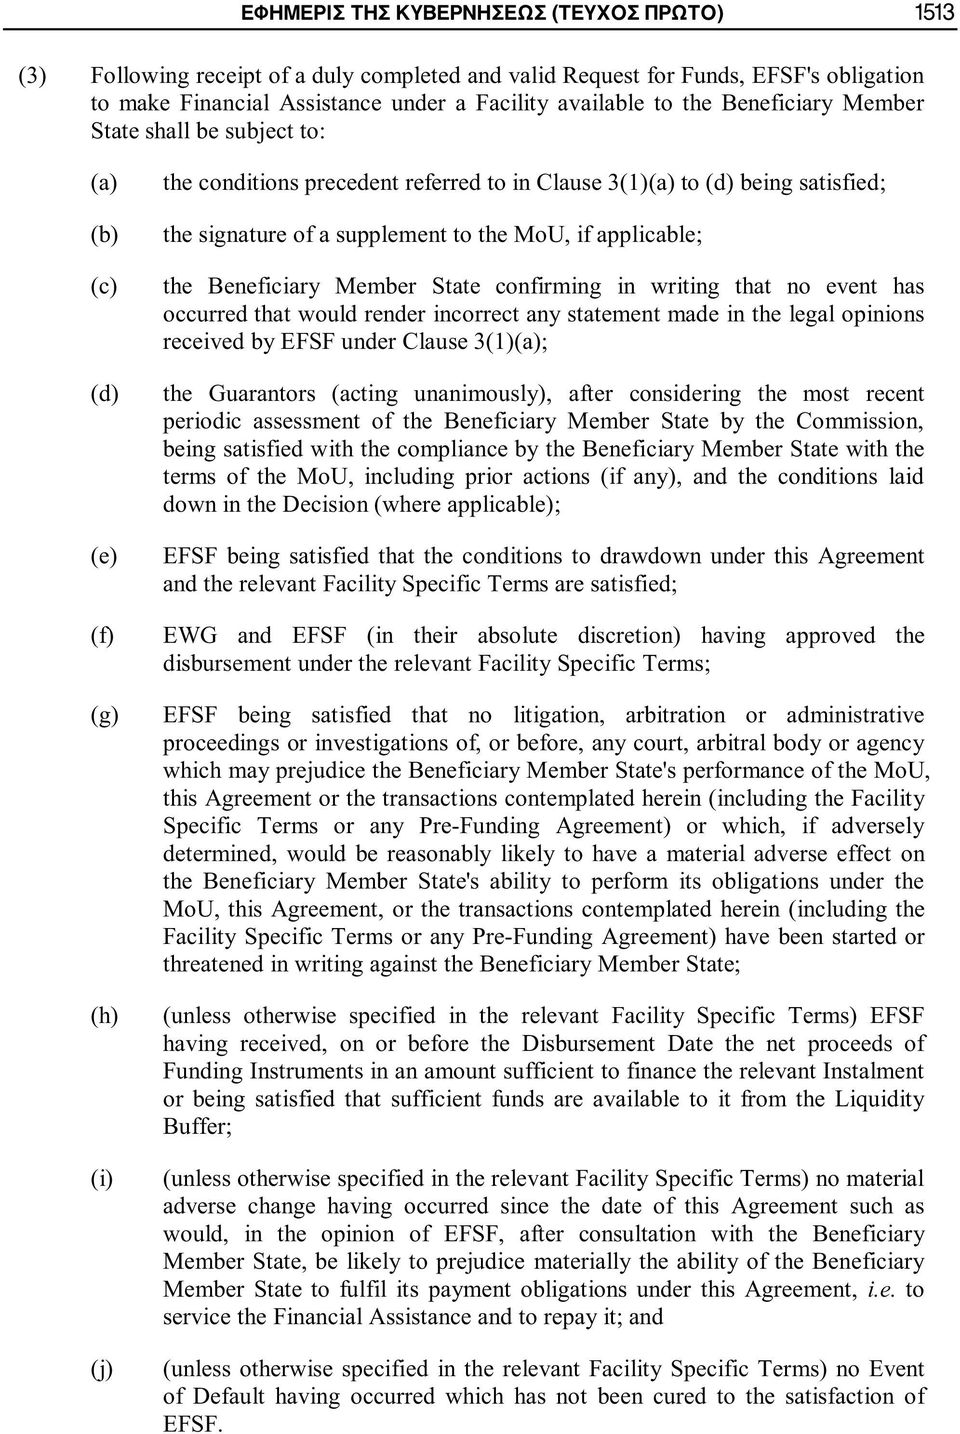 the MoU, if applicable; the Beneficiary Member State confirming in writing that no event has occurred that would render incorrect any statement made in the legal opinions received by EFSF under